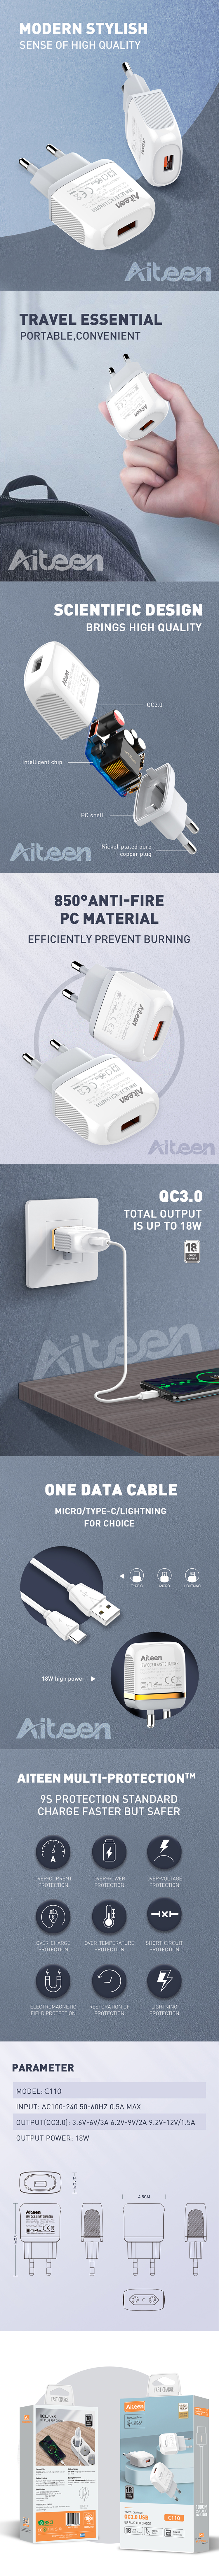 C110 Fast Wall Charger 18W WHITE